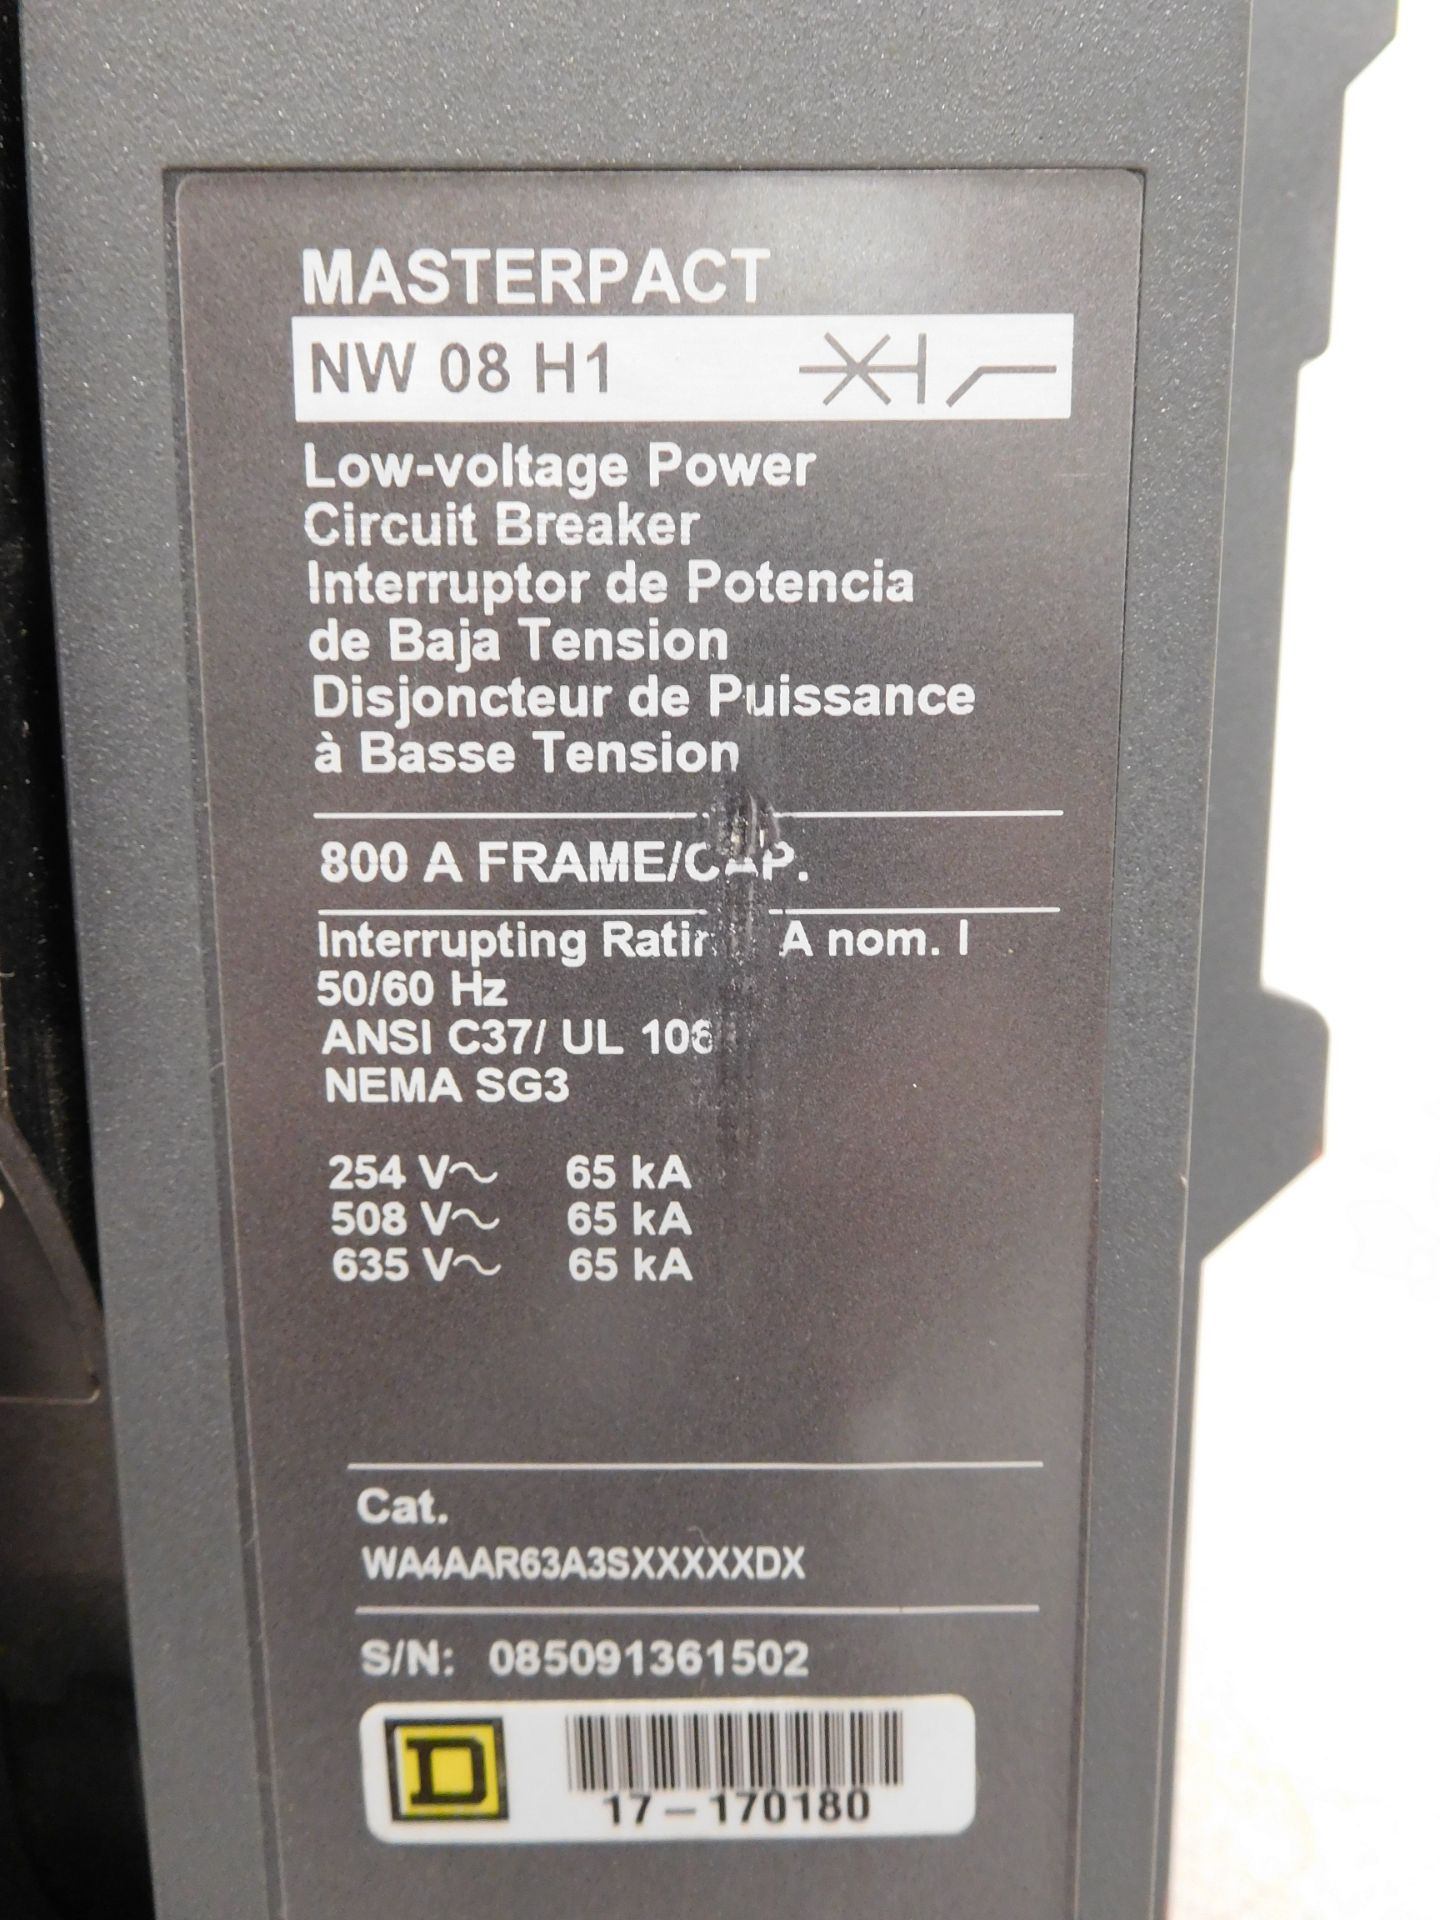 Square D NW 08 H1 Masterpact 800 Amp Low-Voltage Power Circuit Breaker - Image 2 of 7